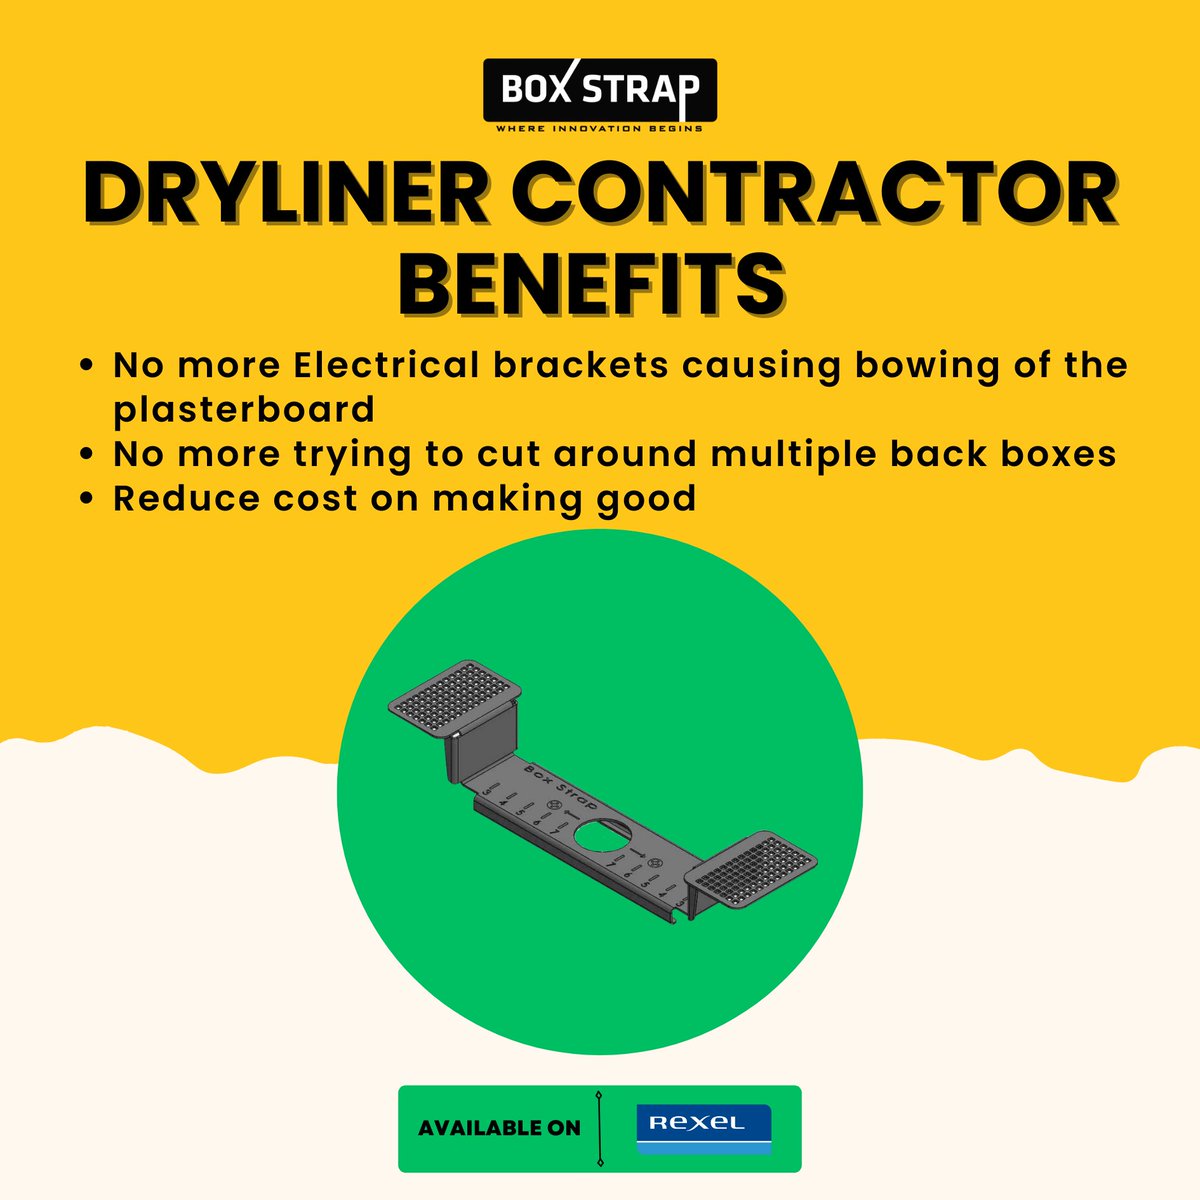 Dryliner Contractors, say goodbye to bowed plasterboard! The Box Strap bracket ensures a smooth finish without the hassle.

#rexel #boxstrap #electrical #sparkylife #boxstrap #electricalfixings #electrician #electricalcontractor #newbuilddevelopment #electricianlife #sparky